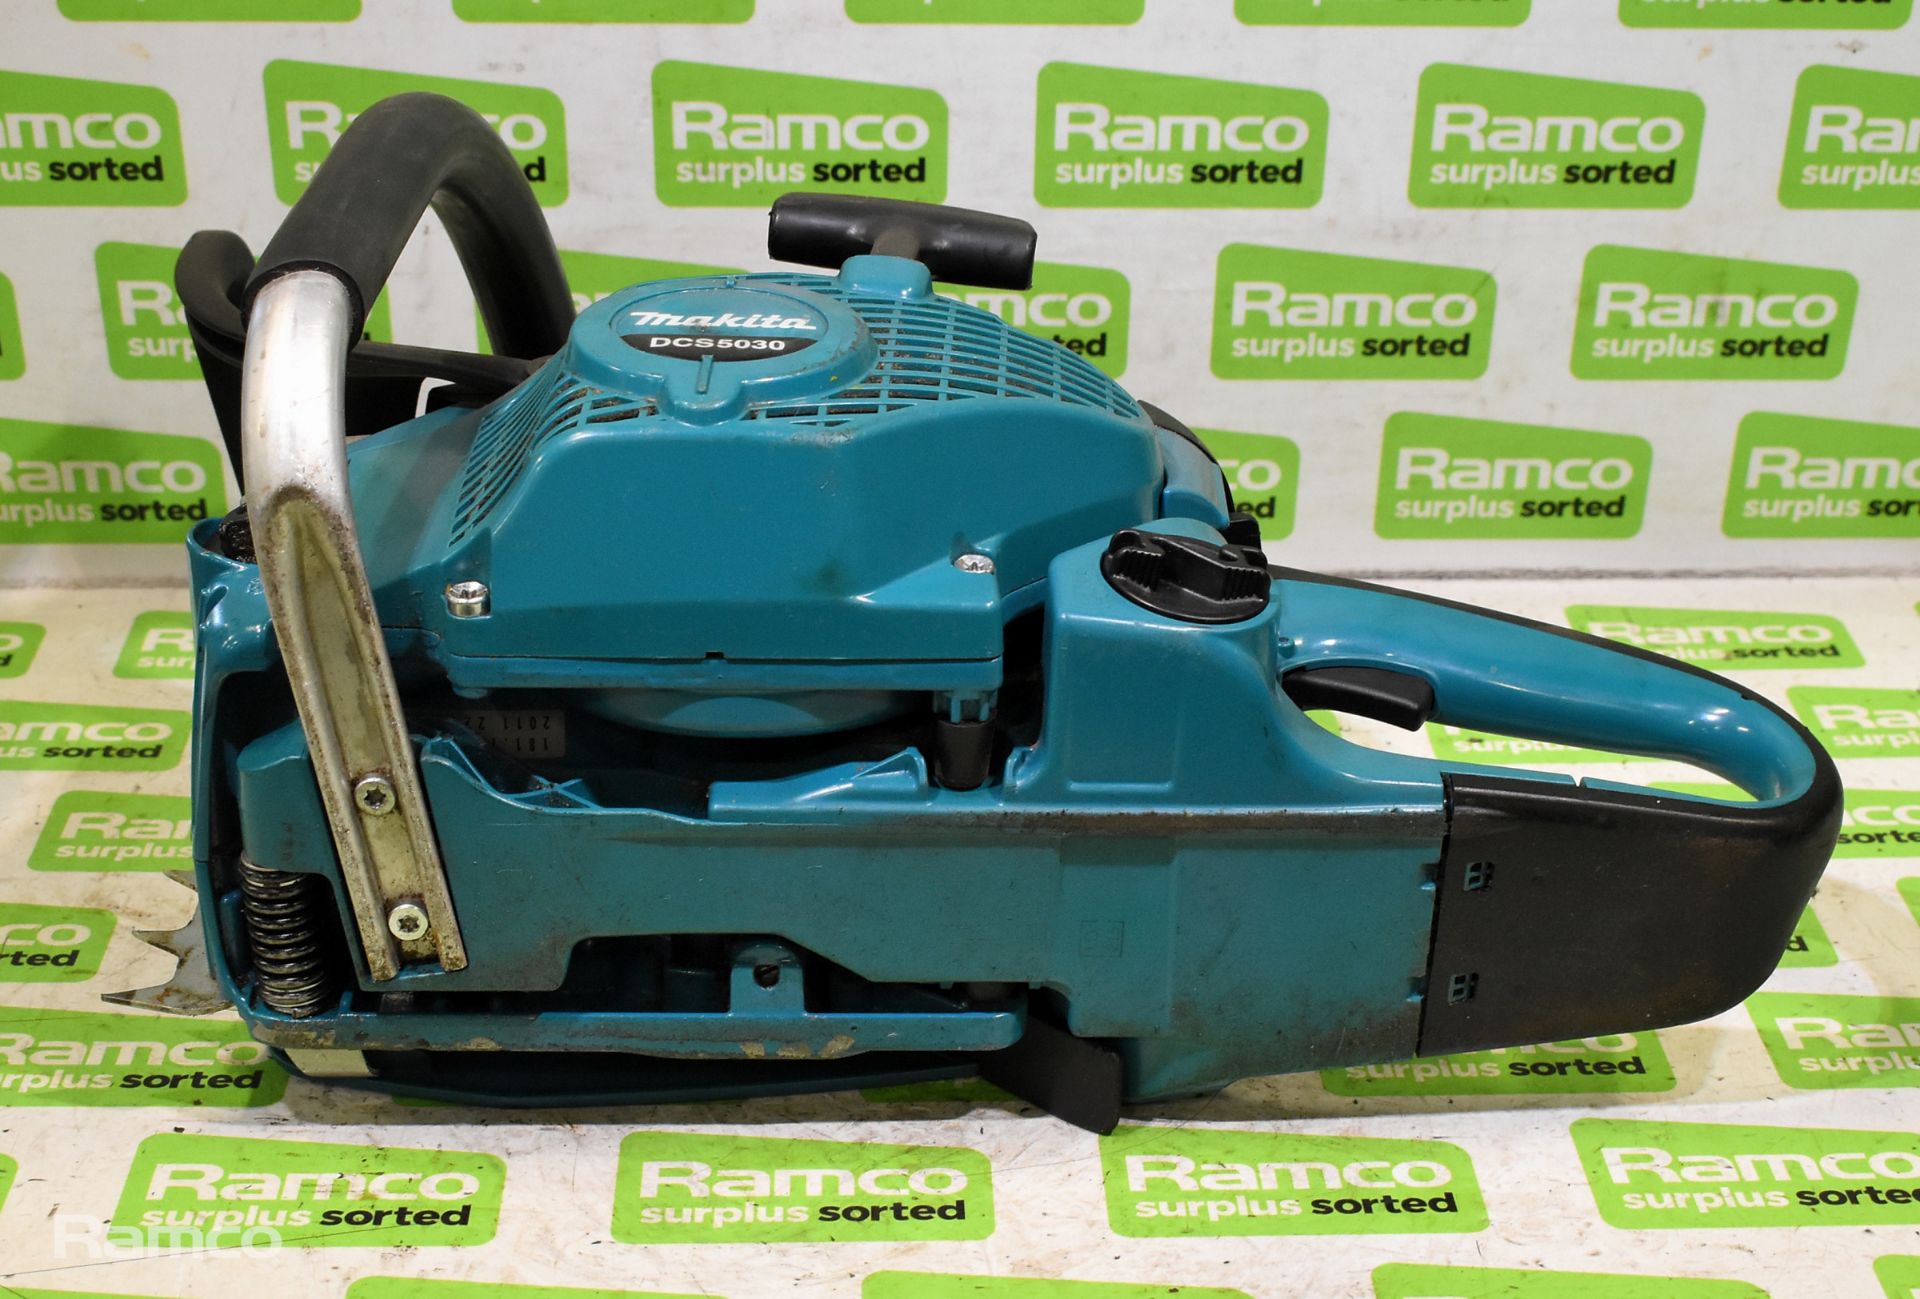 6x Makita DCS5030 50cc petrol chainsaw - BODIES ONLY - AS SPARES & REPAIRS - Image 33 of 33